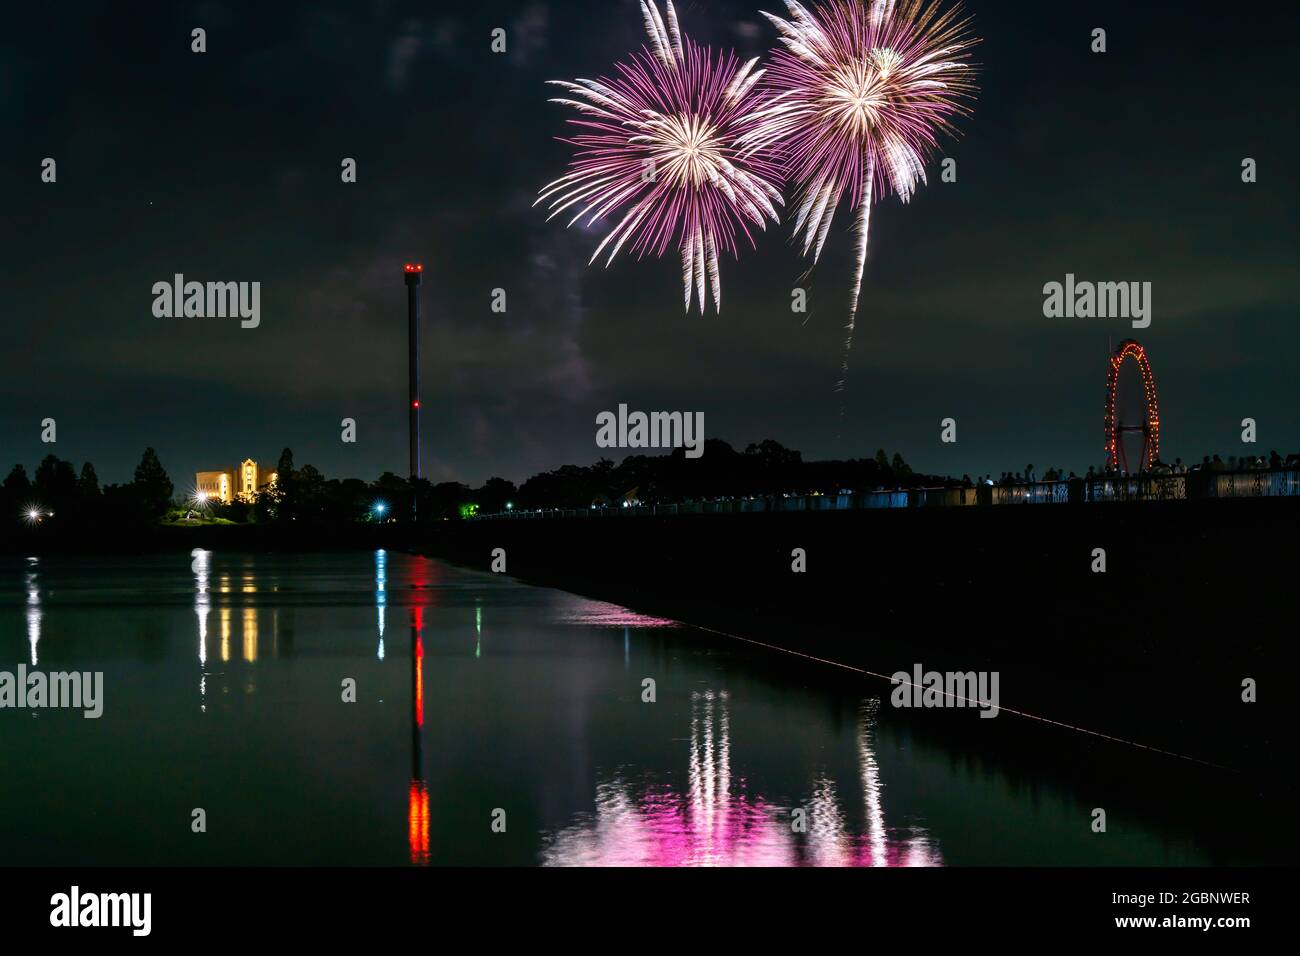 Beautiful Fireworks Celebration In Japan | Summer Season Night Festival | Near The Lake | No People  | Firework With Colourful Shadow Stock Photo